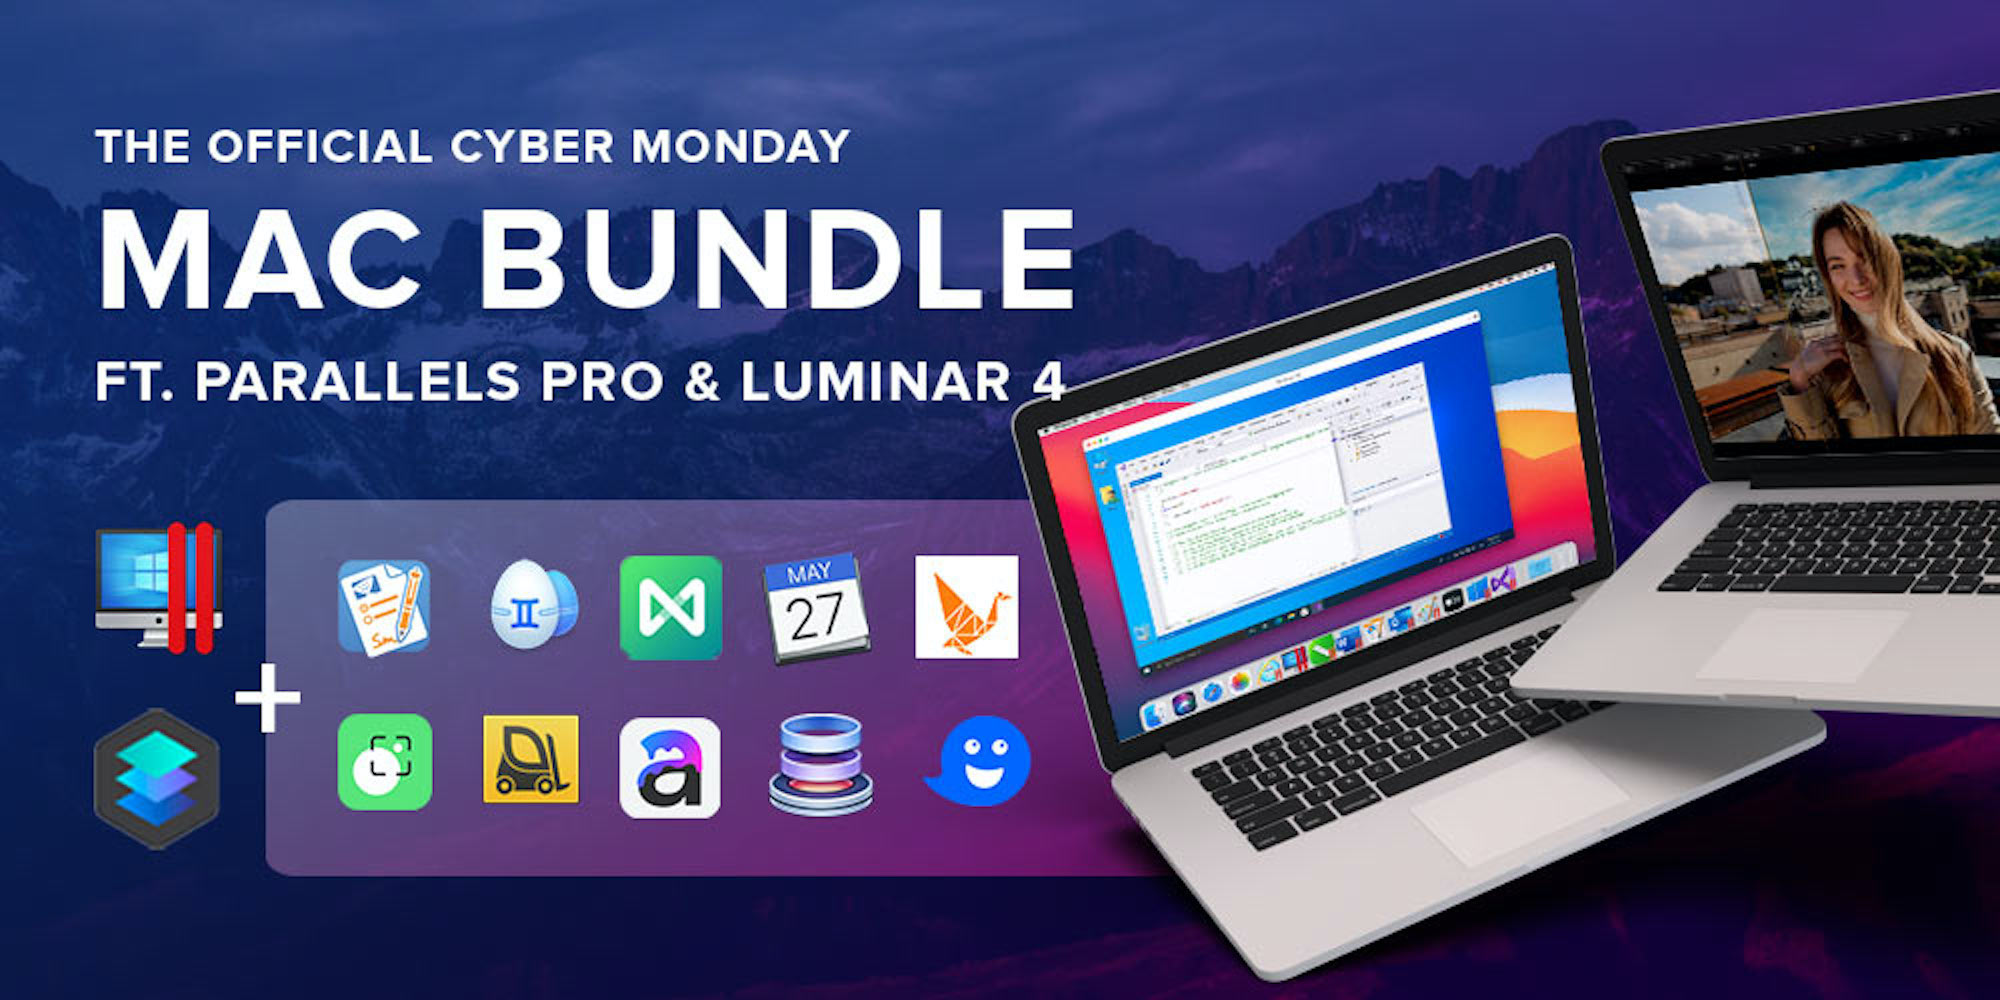 Parallels Pro Luminar 4 And More For 3 50 Each Here S Your Last Shot At A Mac Owner S Dream Bundle